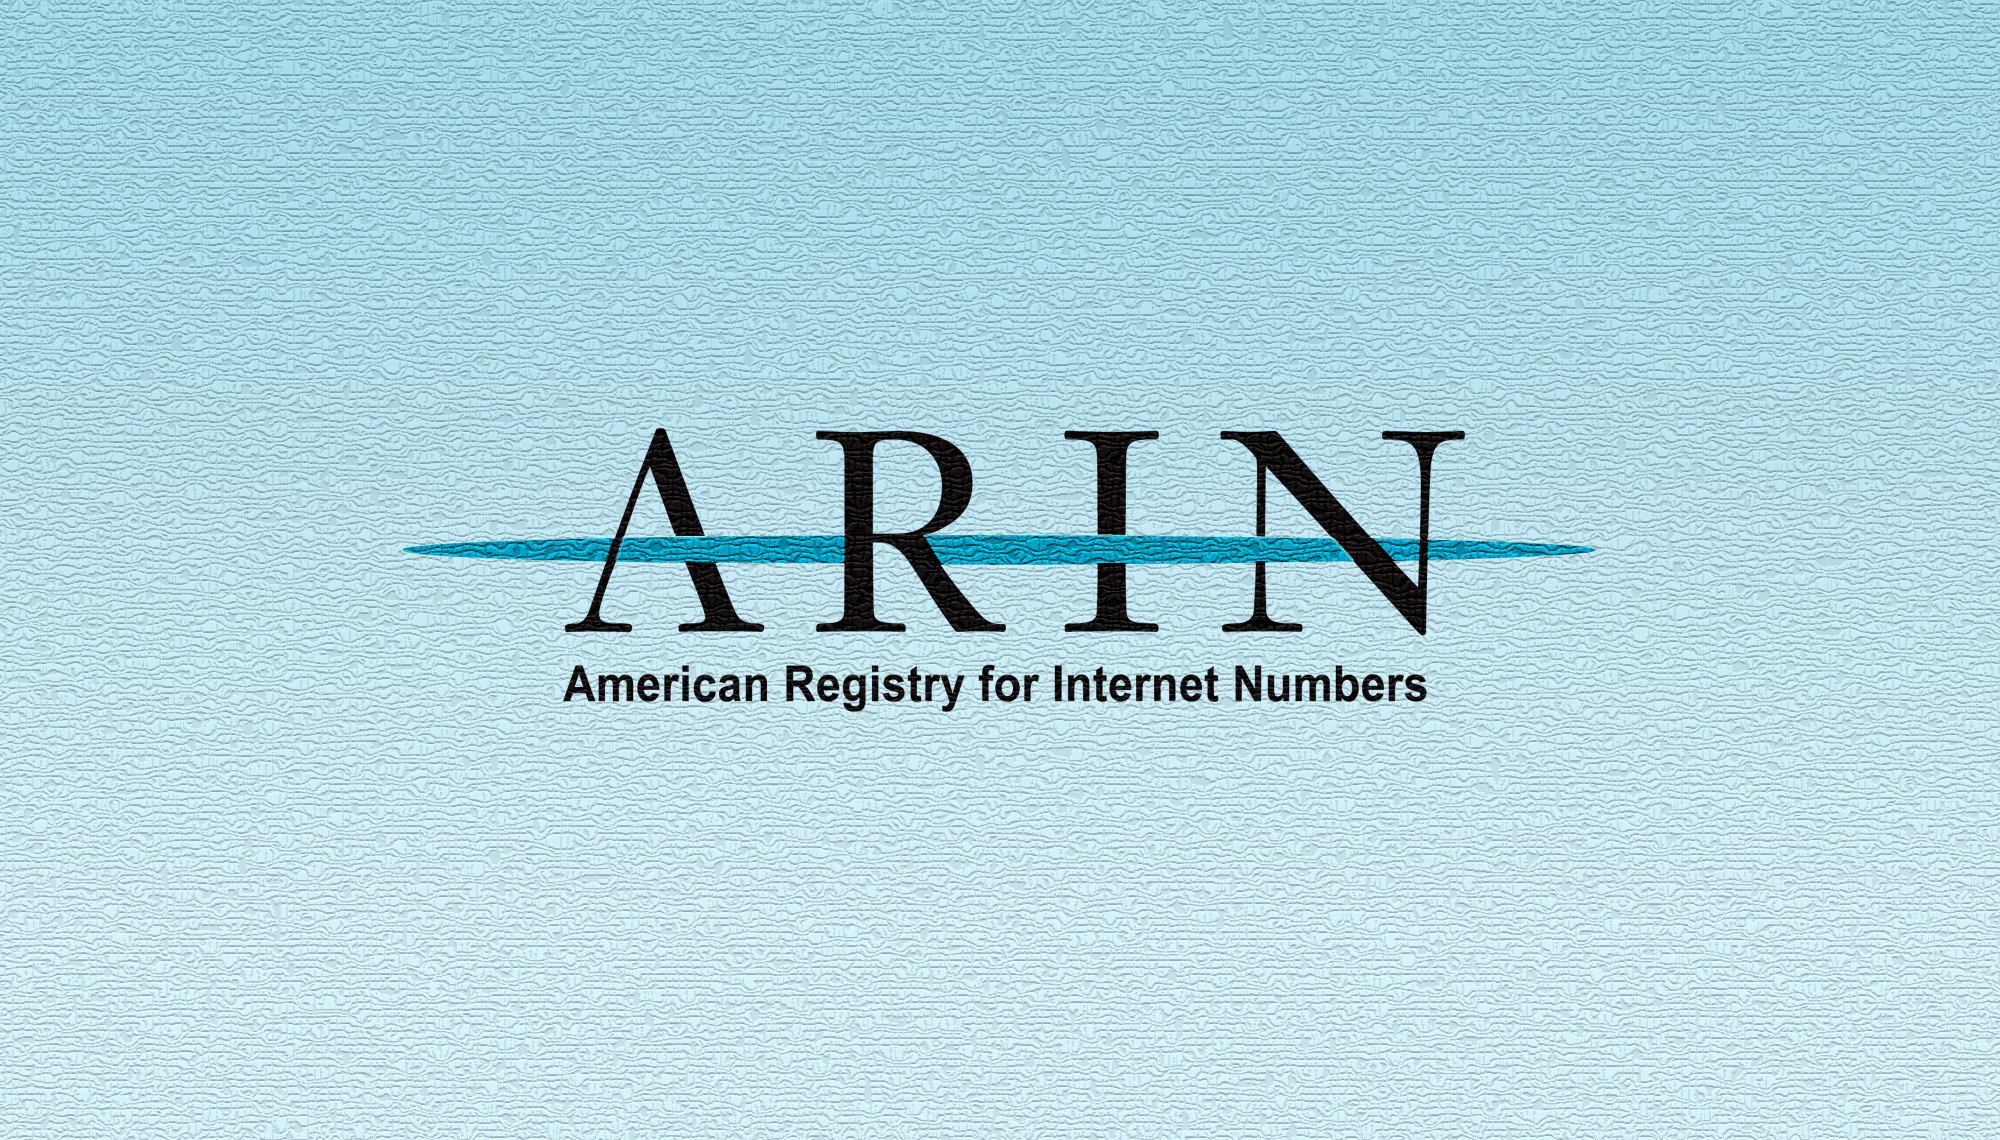 Meet the Candidates for the 2013 ARIN Elections